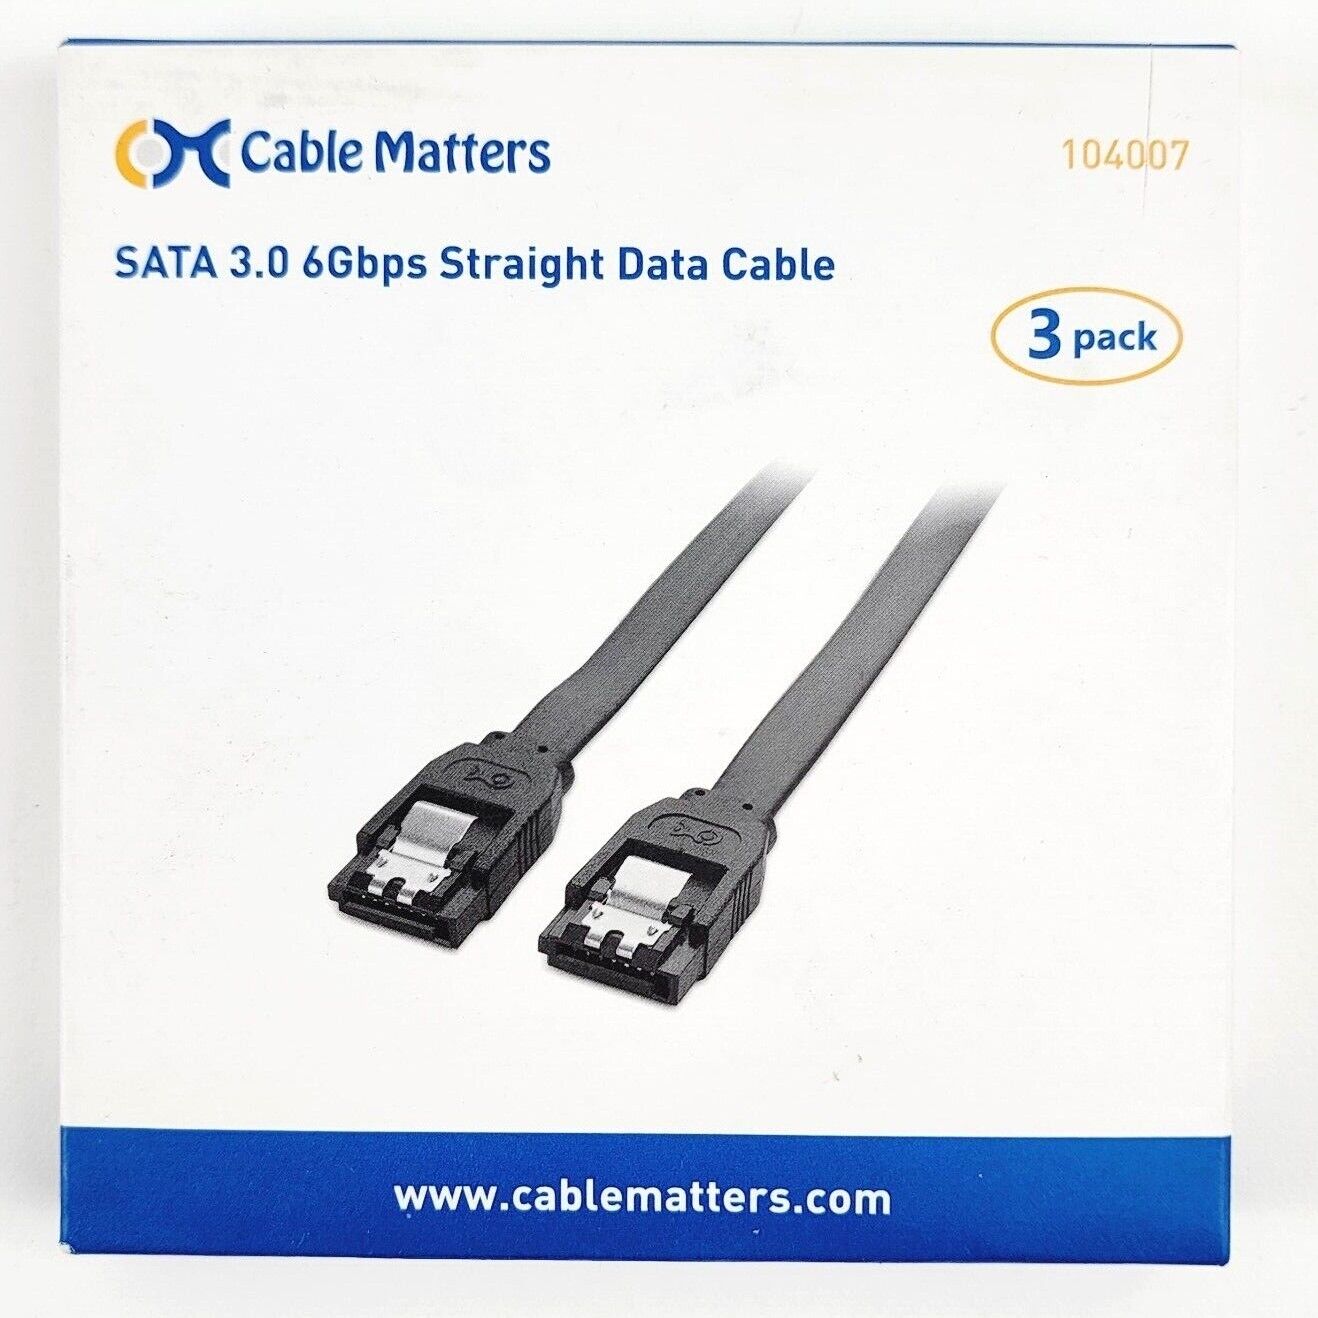  3 Pack Cable Matters 18 Inch SATA 3 6.0 Gbps Cable Low Profile Easy Grip